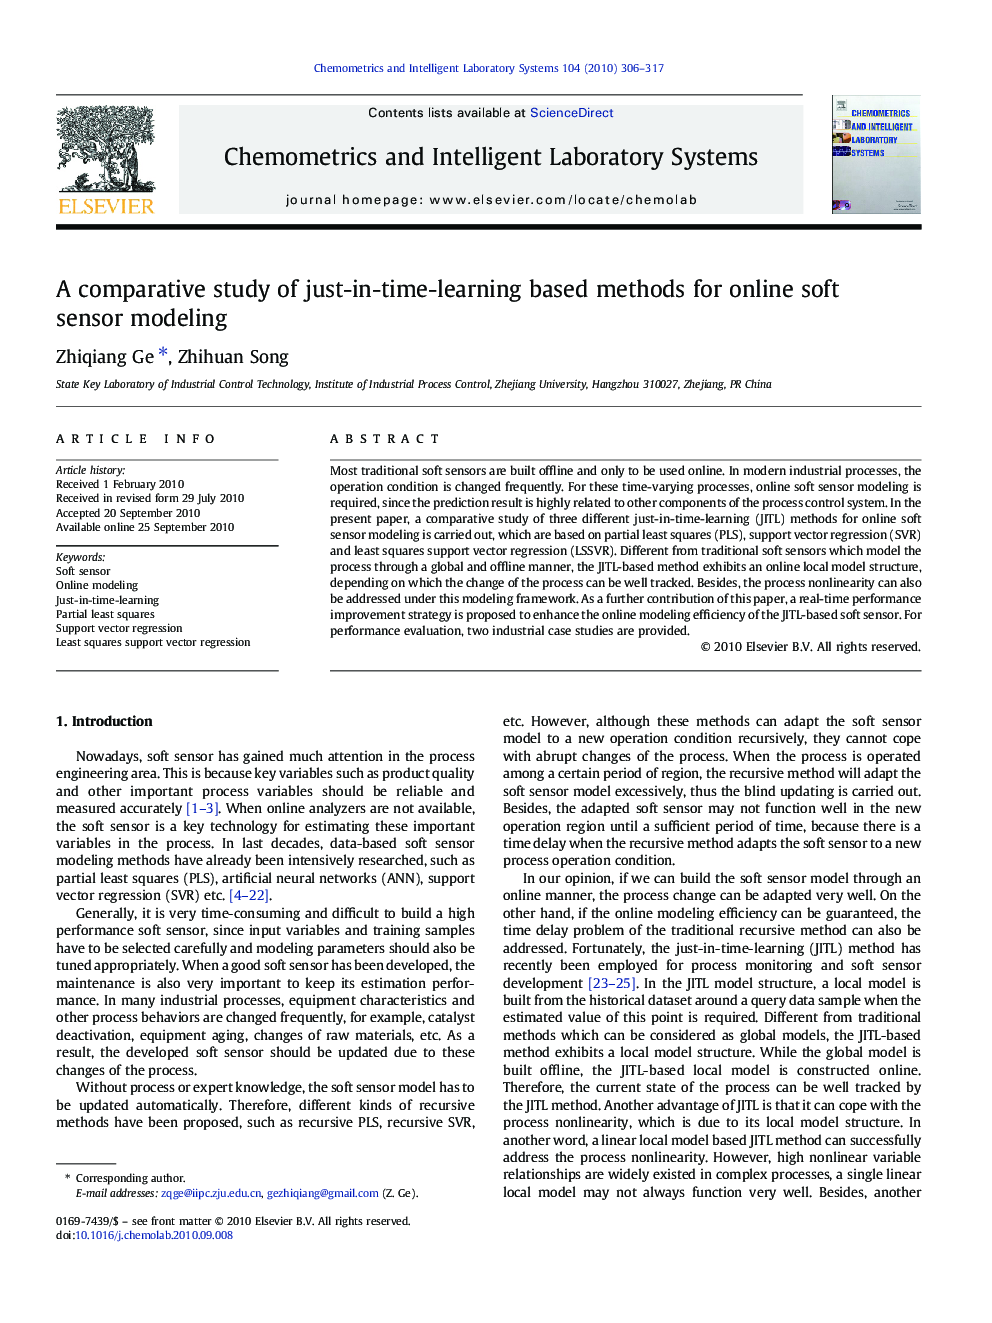 A comparative study of just-in-time-learning based methods for online soft sensor modeling